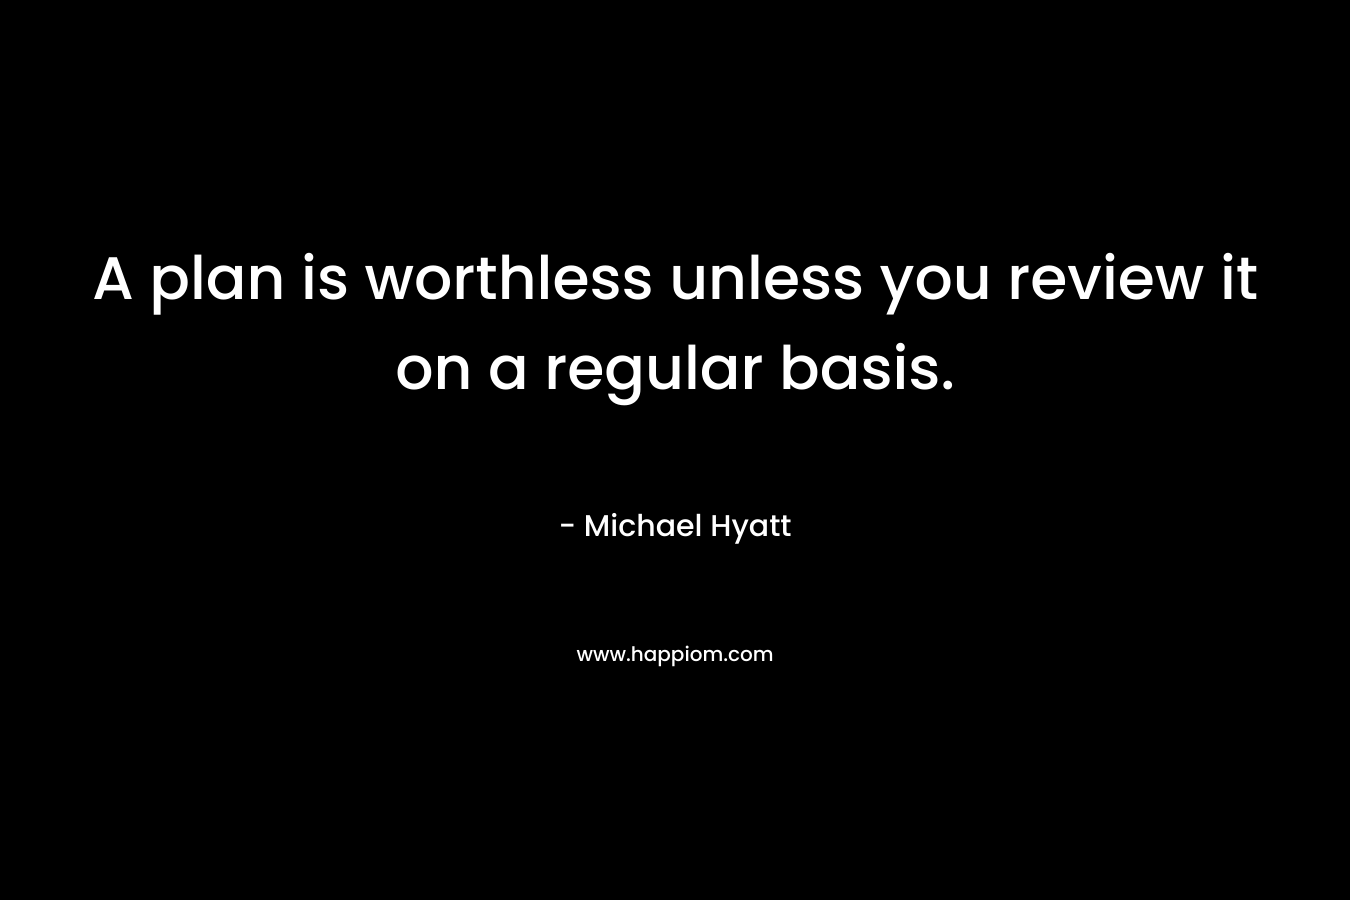 A plan is worthless unless you review it on a regular basis.